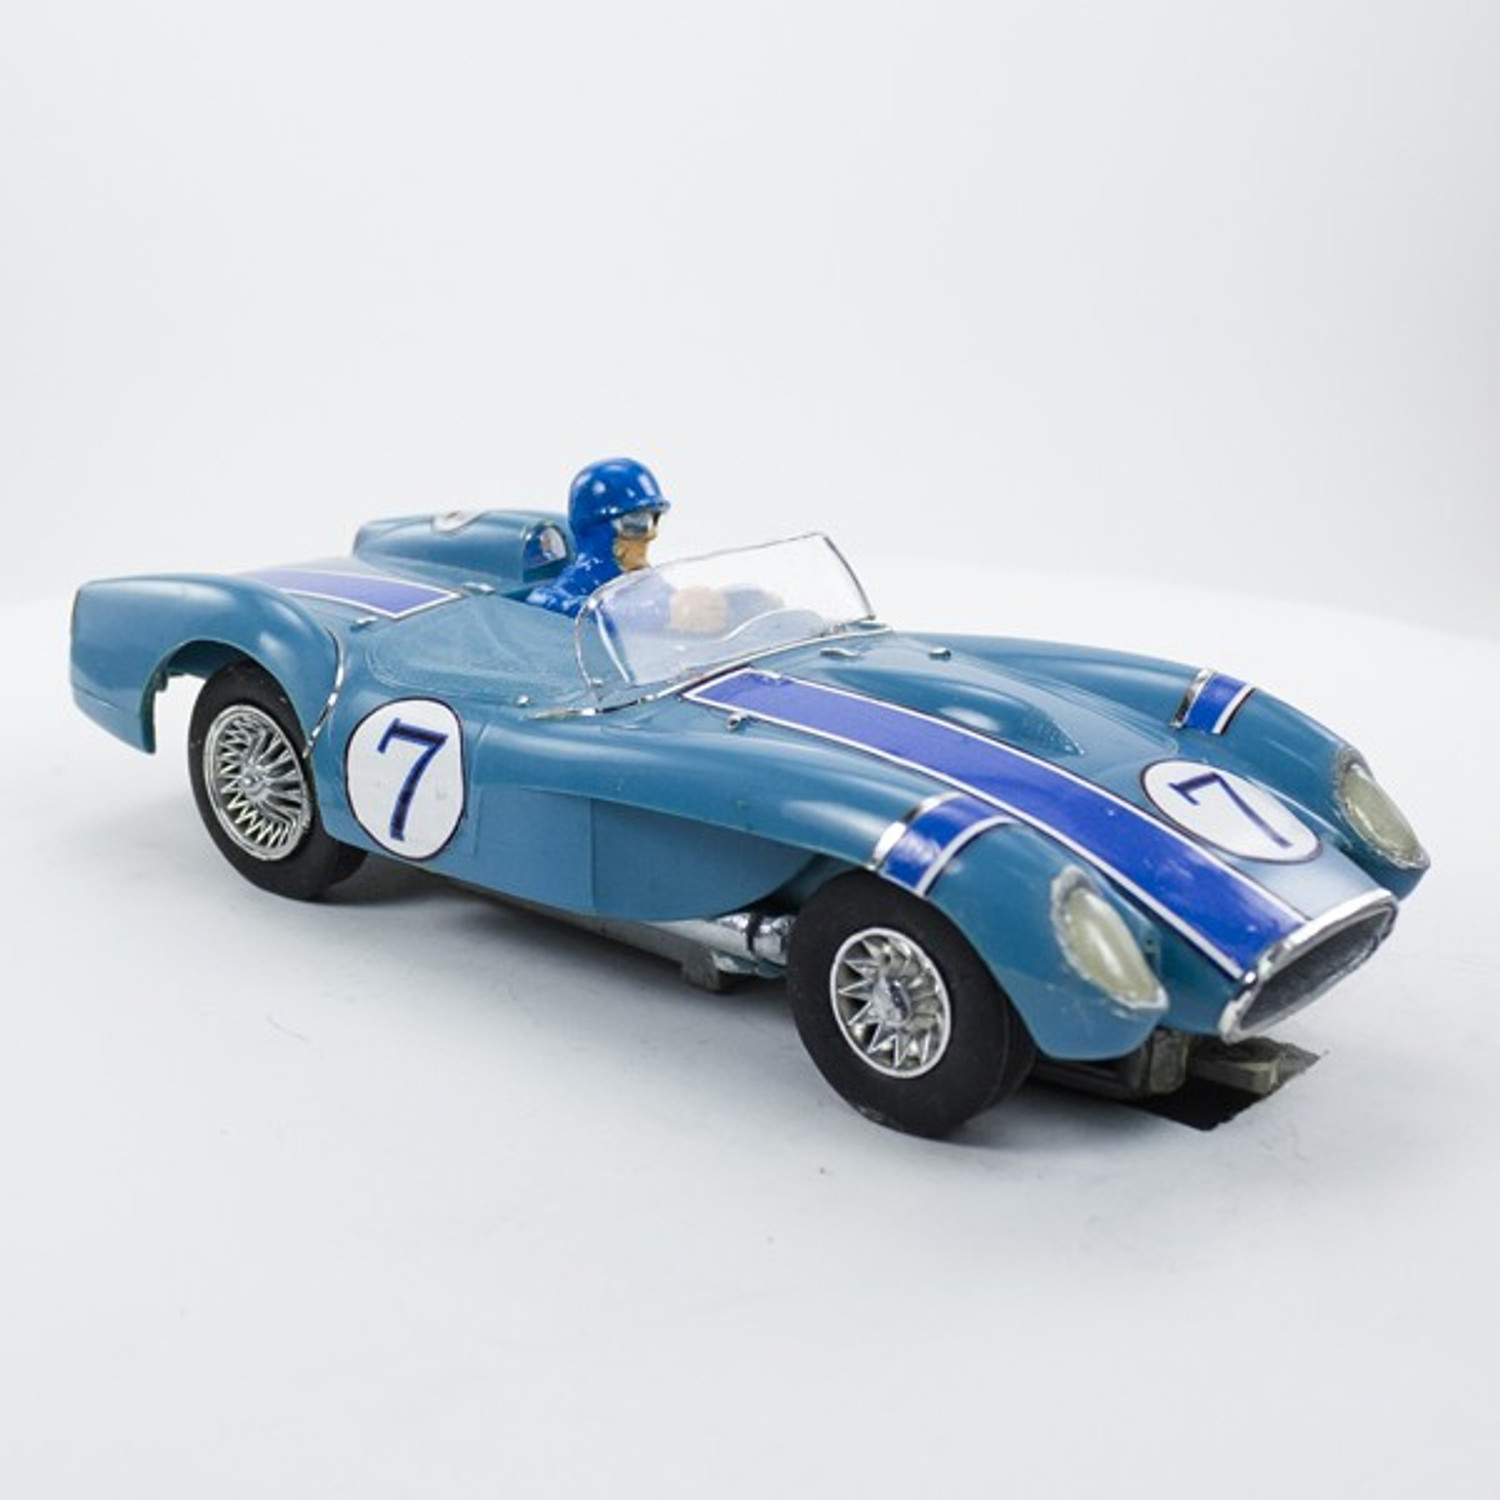 Stock Number: 16104 - Blue Car Top by Unknown